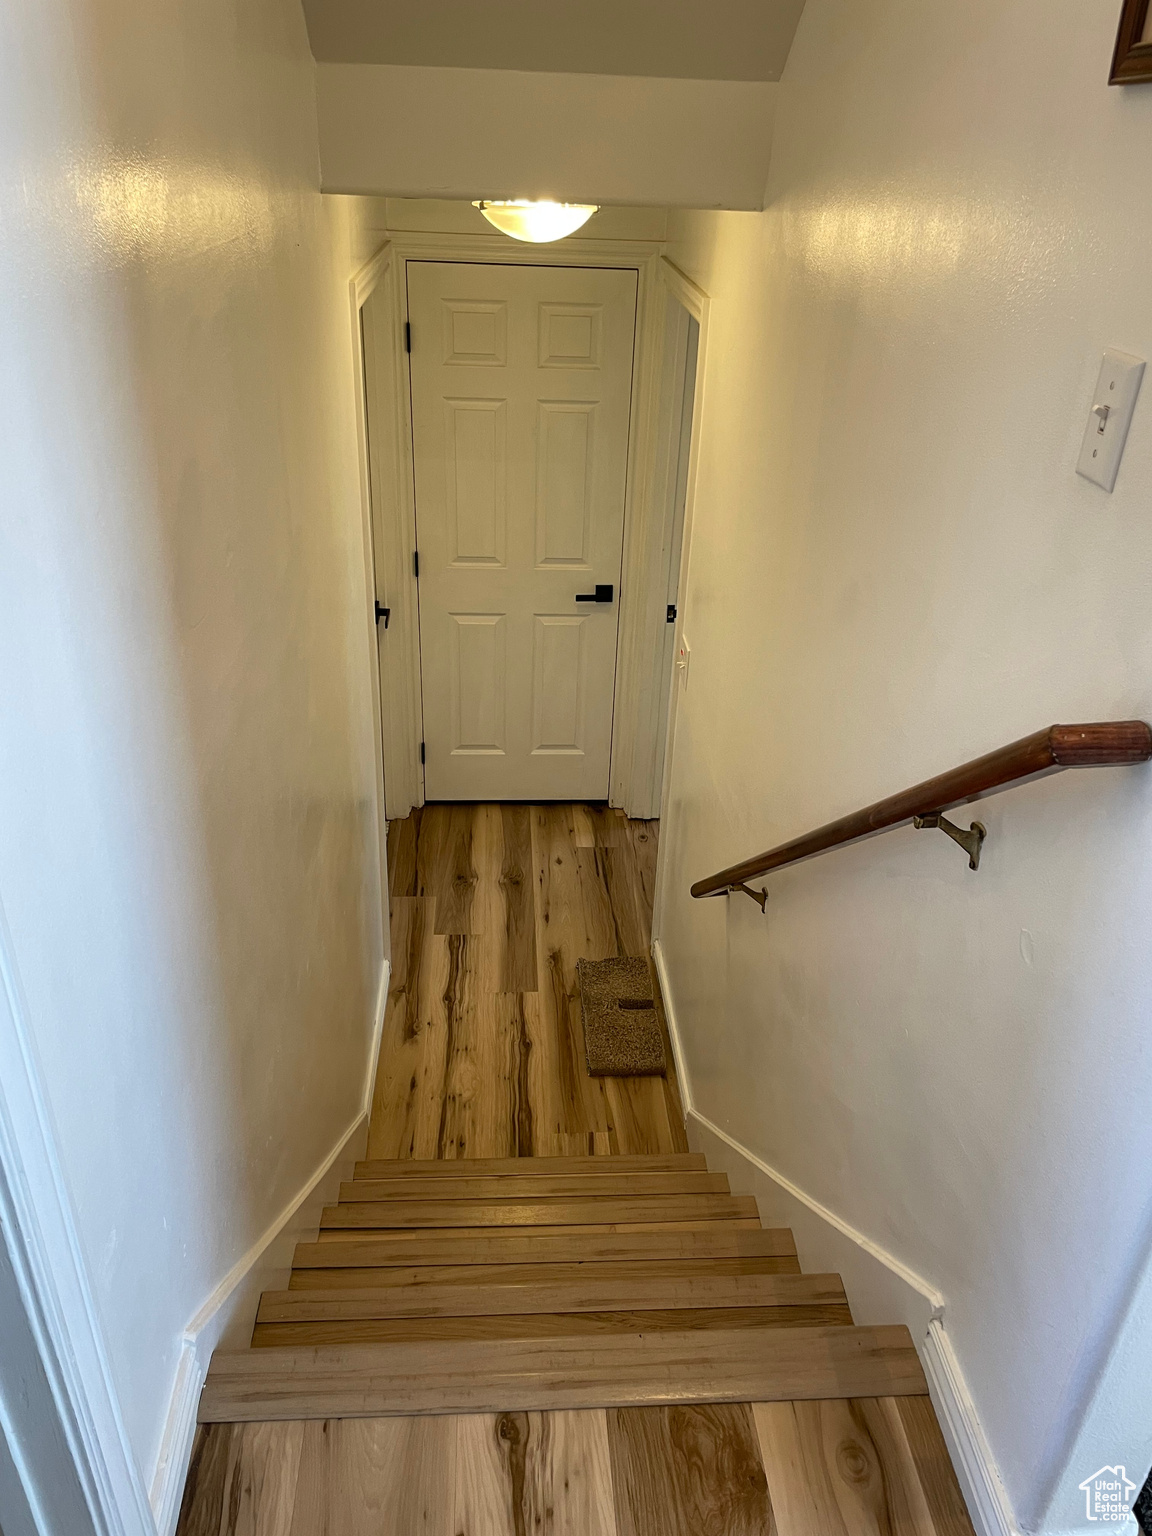 Stairs leading down to bedroom, storage room and linen closet